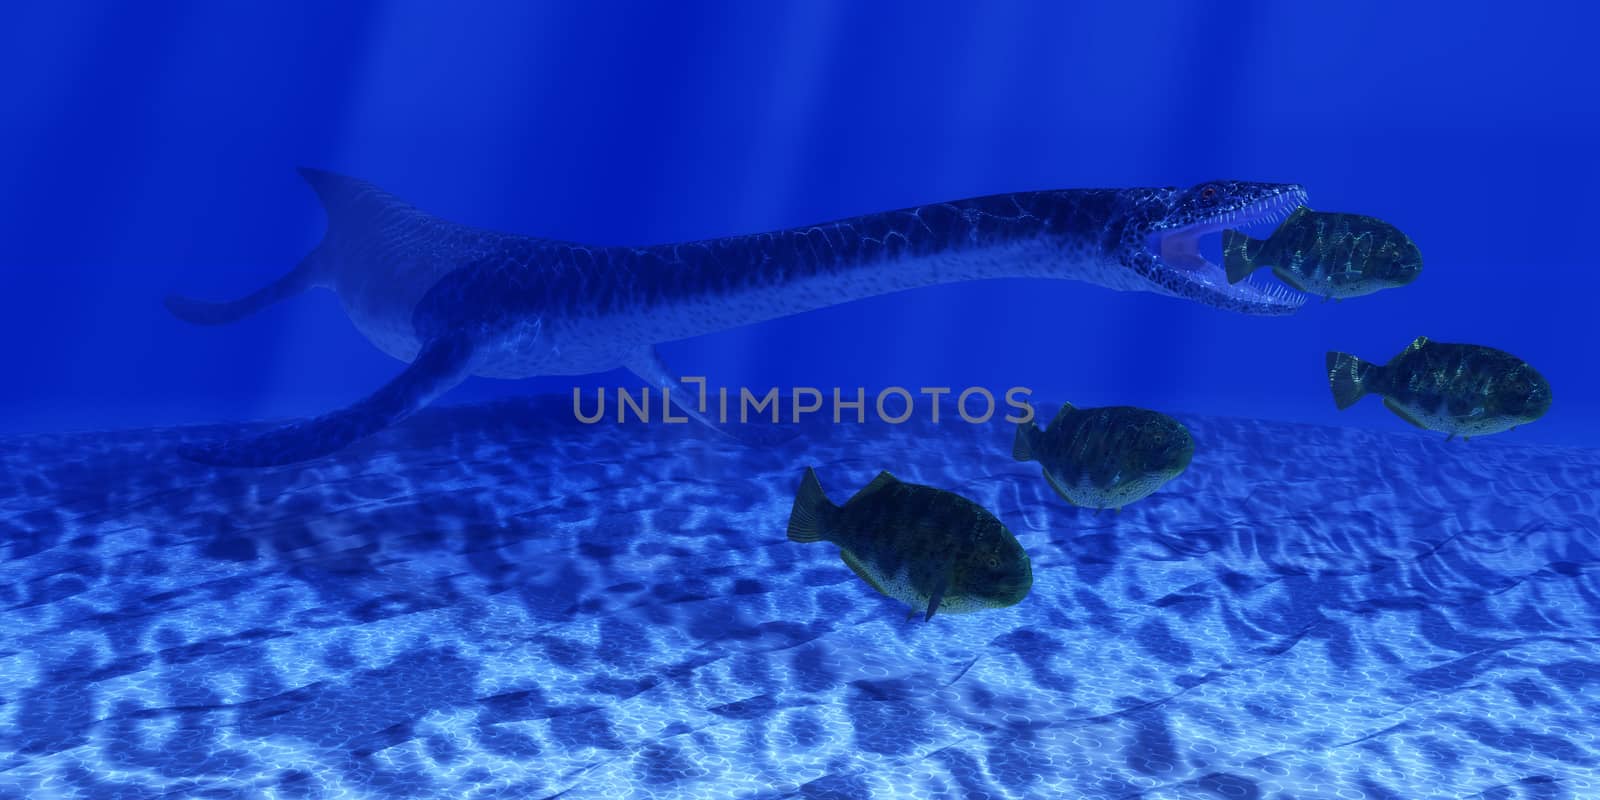 A Plesiosaurus marine reptile sneaks up behind a school of Dapedius fish as it goes in for the attack.